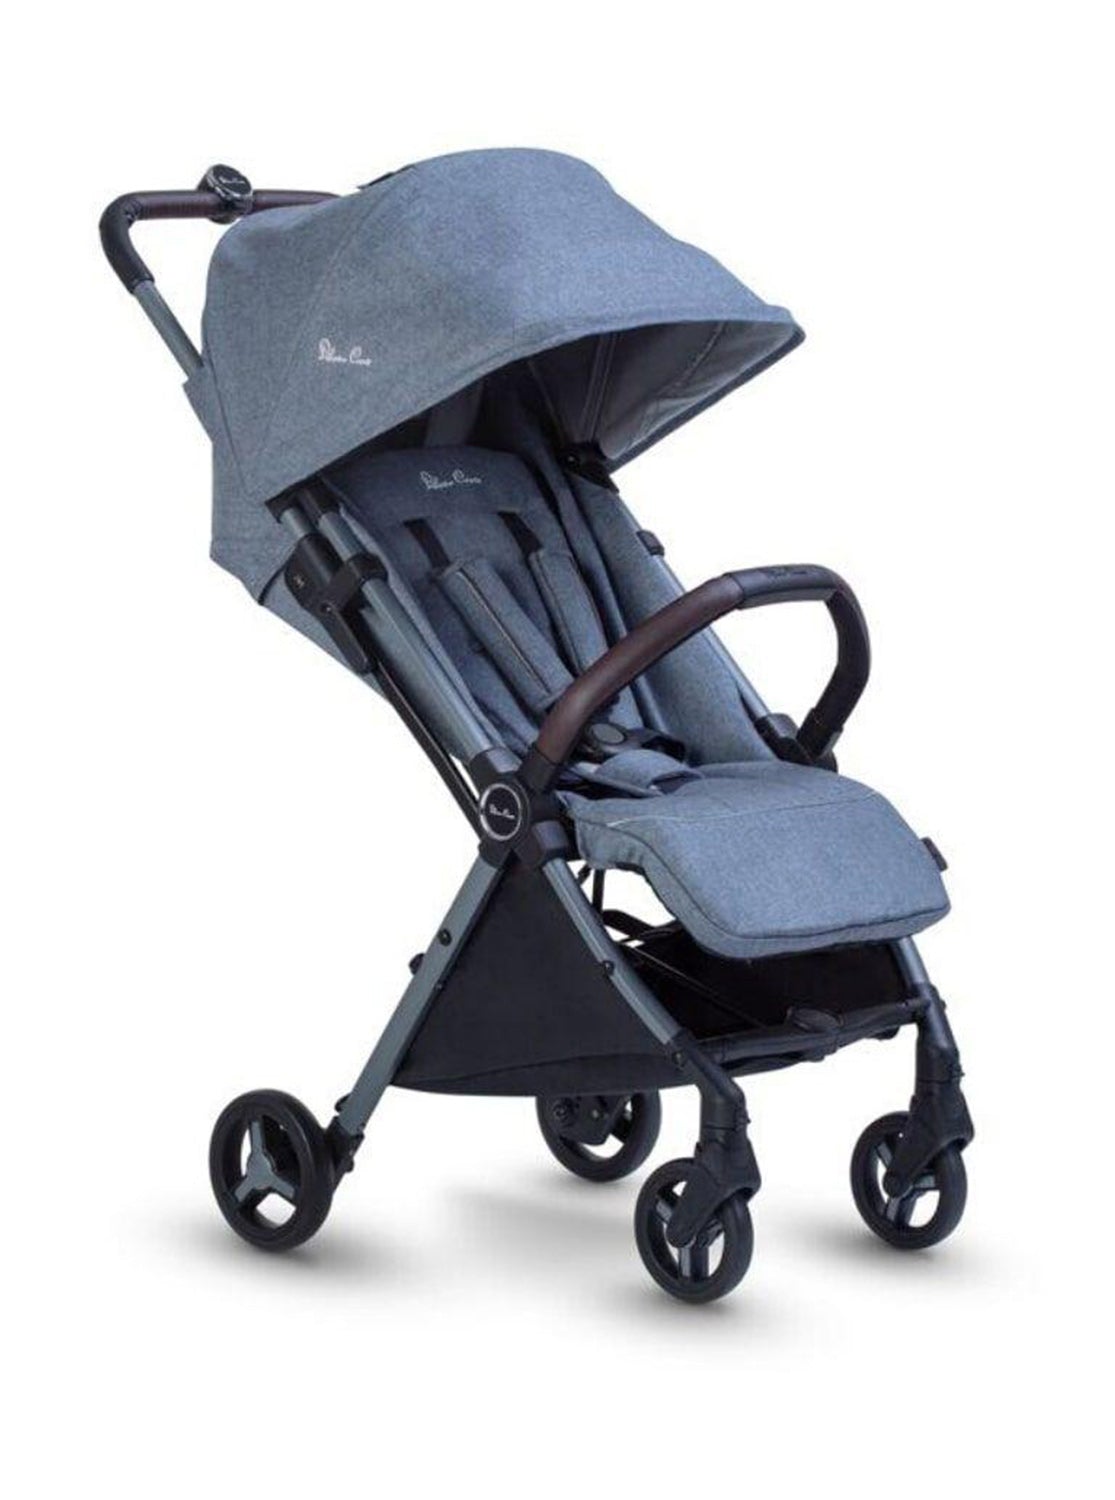 SILVER CROSS Jet Super Compact Stroller Special Edition - ANB Baby -$300 - $500